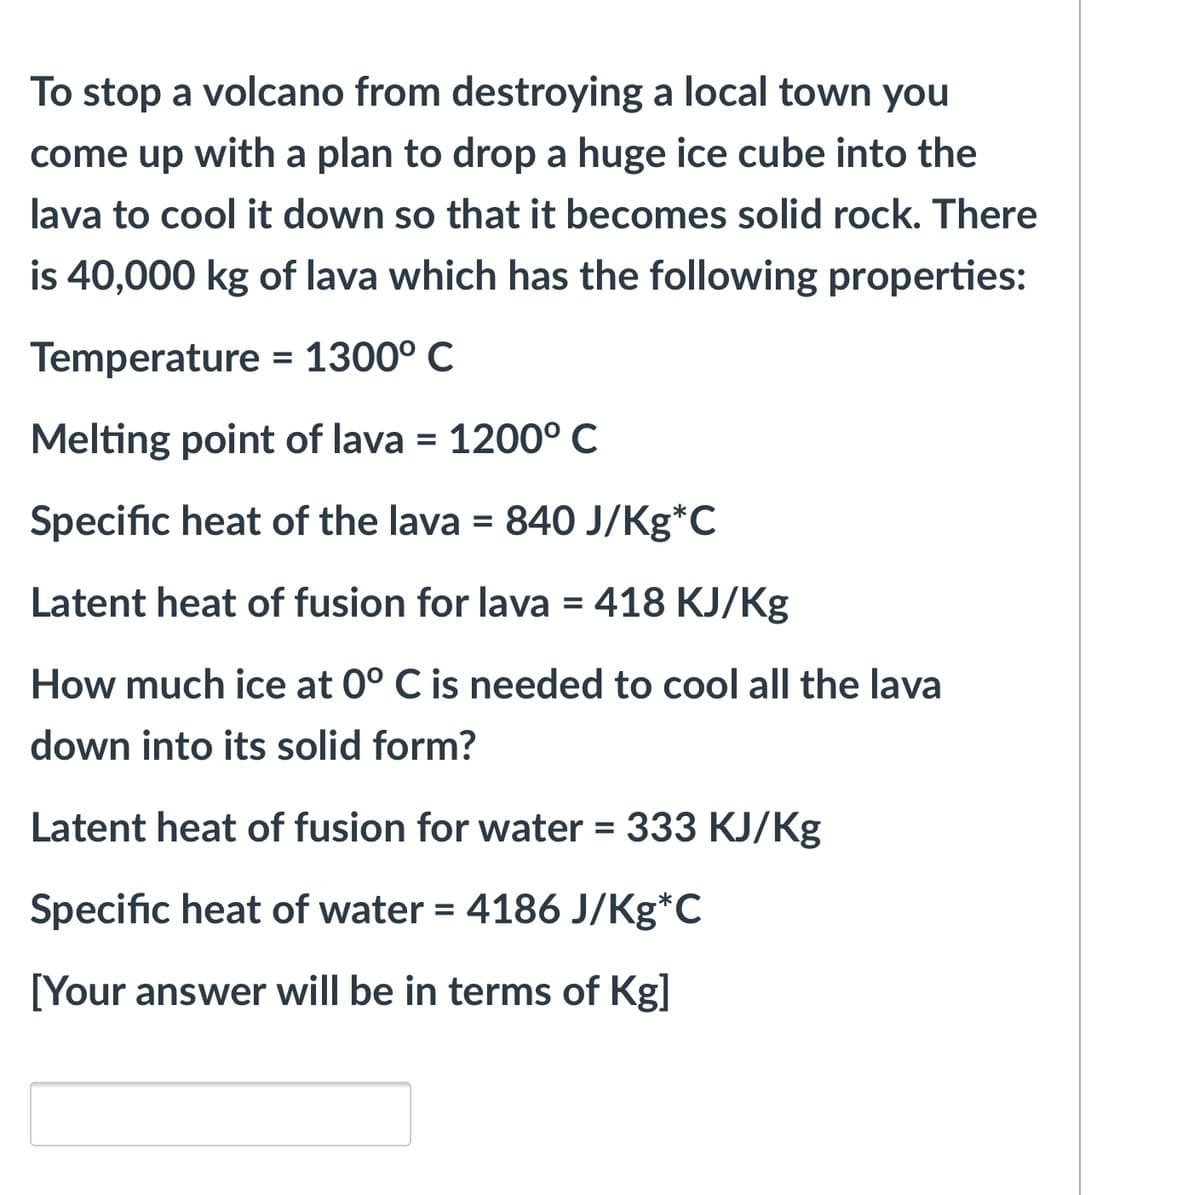 To stop a volcano from destroying a local town you
come up with a plan to drop a huge ice cube into the
lava to cool it down so that it becomes solid rock. There
is 40,000 kg of lava which has the following properties:
Temperature = 1300° C
Melting point of lava = 1200° C
%3D
Specific heat of the lava = 840 J/Kg*C
Latent heat of fusion for lava = 418 KJ/Kg
%3D
How much ice at 0° C is needed to cool all the lava
down into its solid form?
Latent heat of fusion for water = 333 KJ/Kg
Specific heat of water = 4186 J/Kg*C
%3D
[Your answer will be in terms of Kg]
